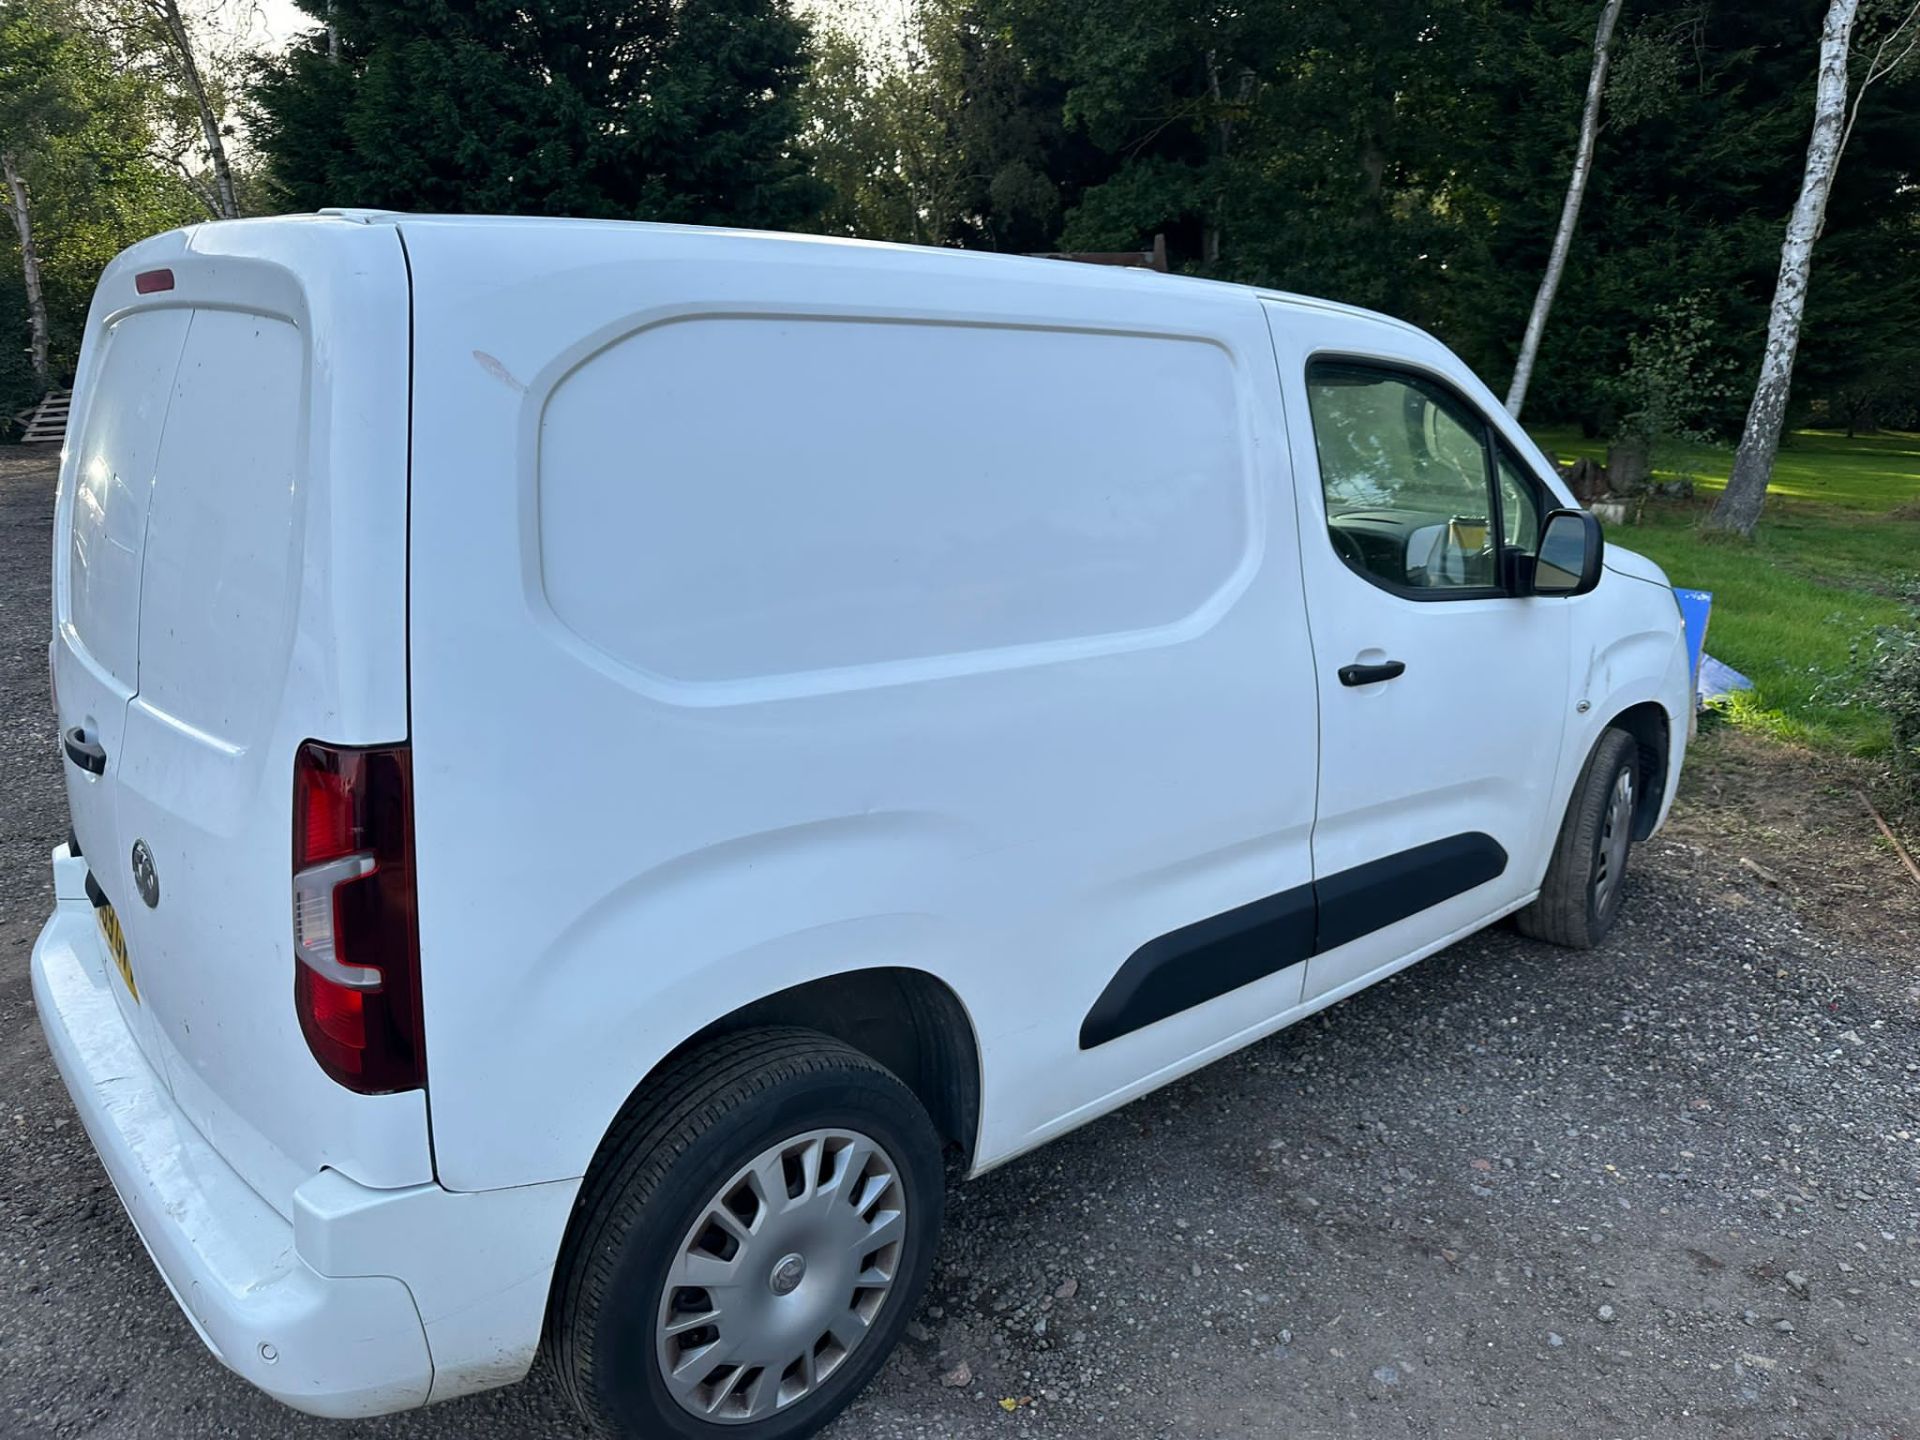 2019 69 VAUXHALL COMBO SPORTIVE PANEL VAN - 60K MILES - AIR CON - PLY LINED - Image 5 of 7